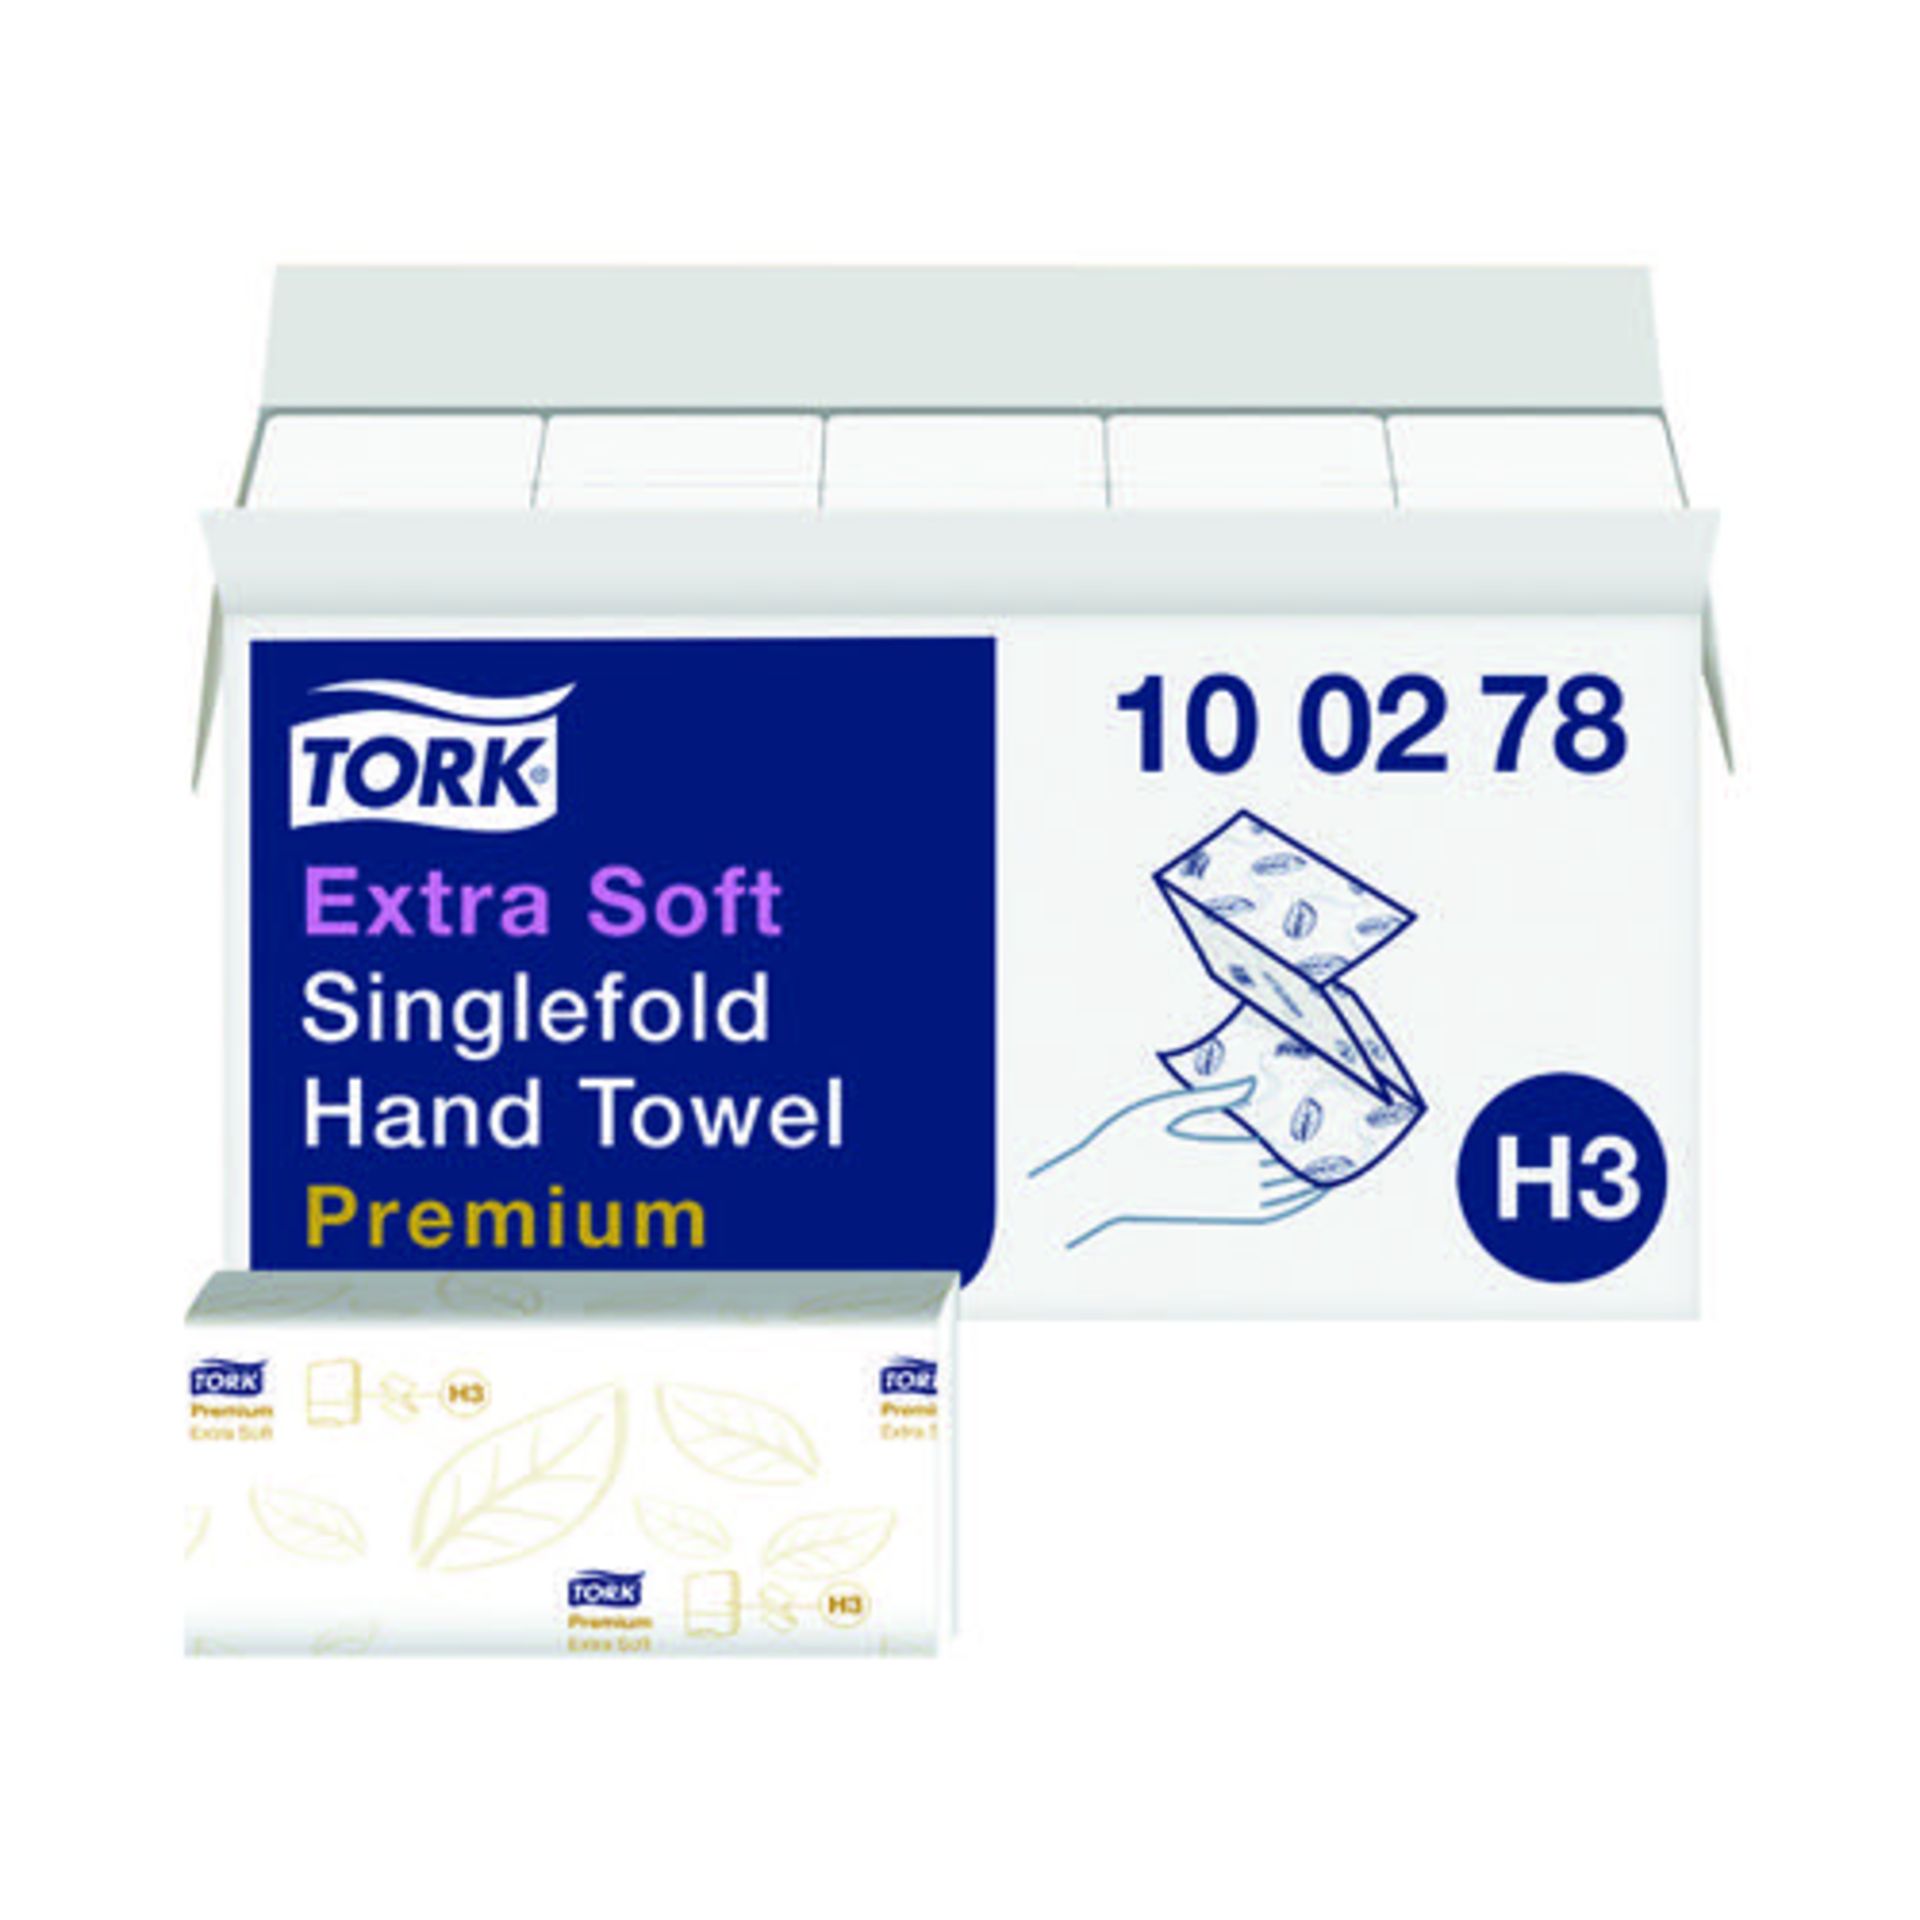 RRP - £42.00 Tork Extra Soft Singlefold Hand Towels White H3, Premium, Embossed, 15 x 200 Sheets, 10 - Image 2 of 2